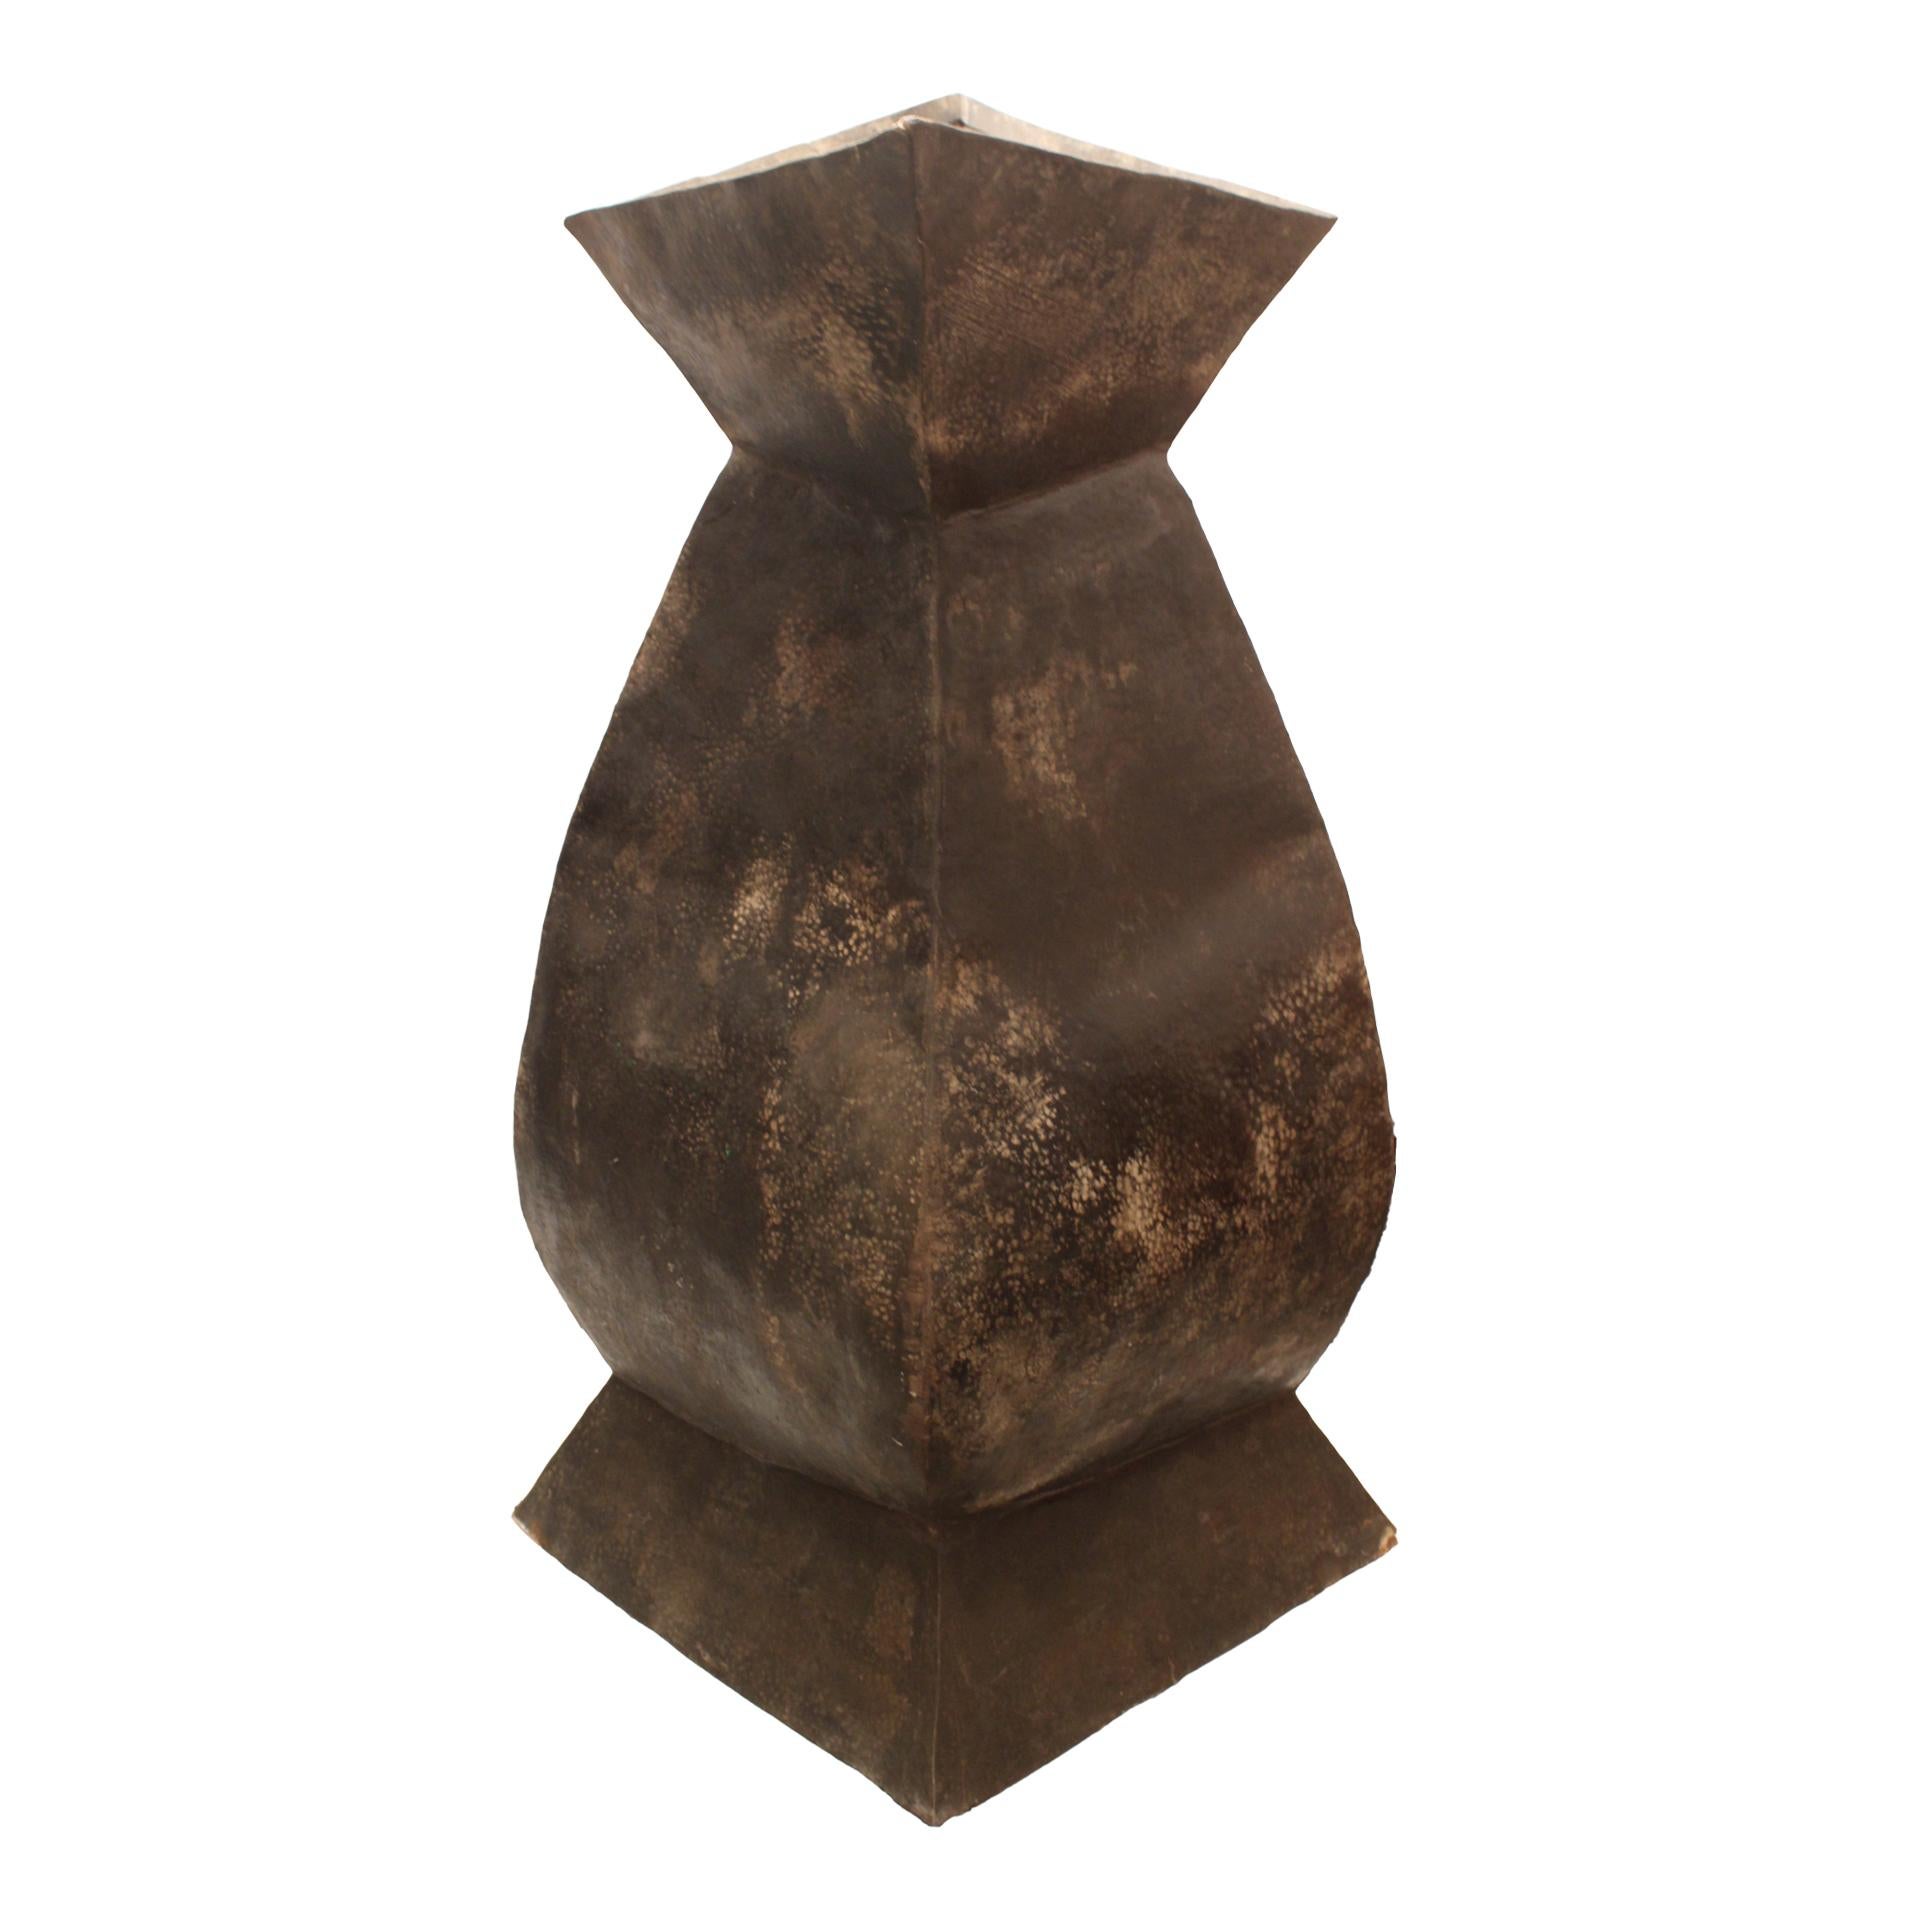 Rare sculptural vessel from the popular crafts of southern Morocco made of hammered metal. Morocco 1970s
